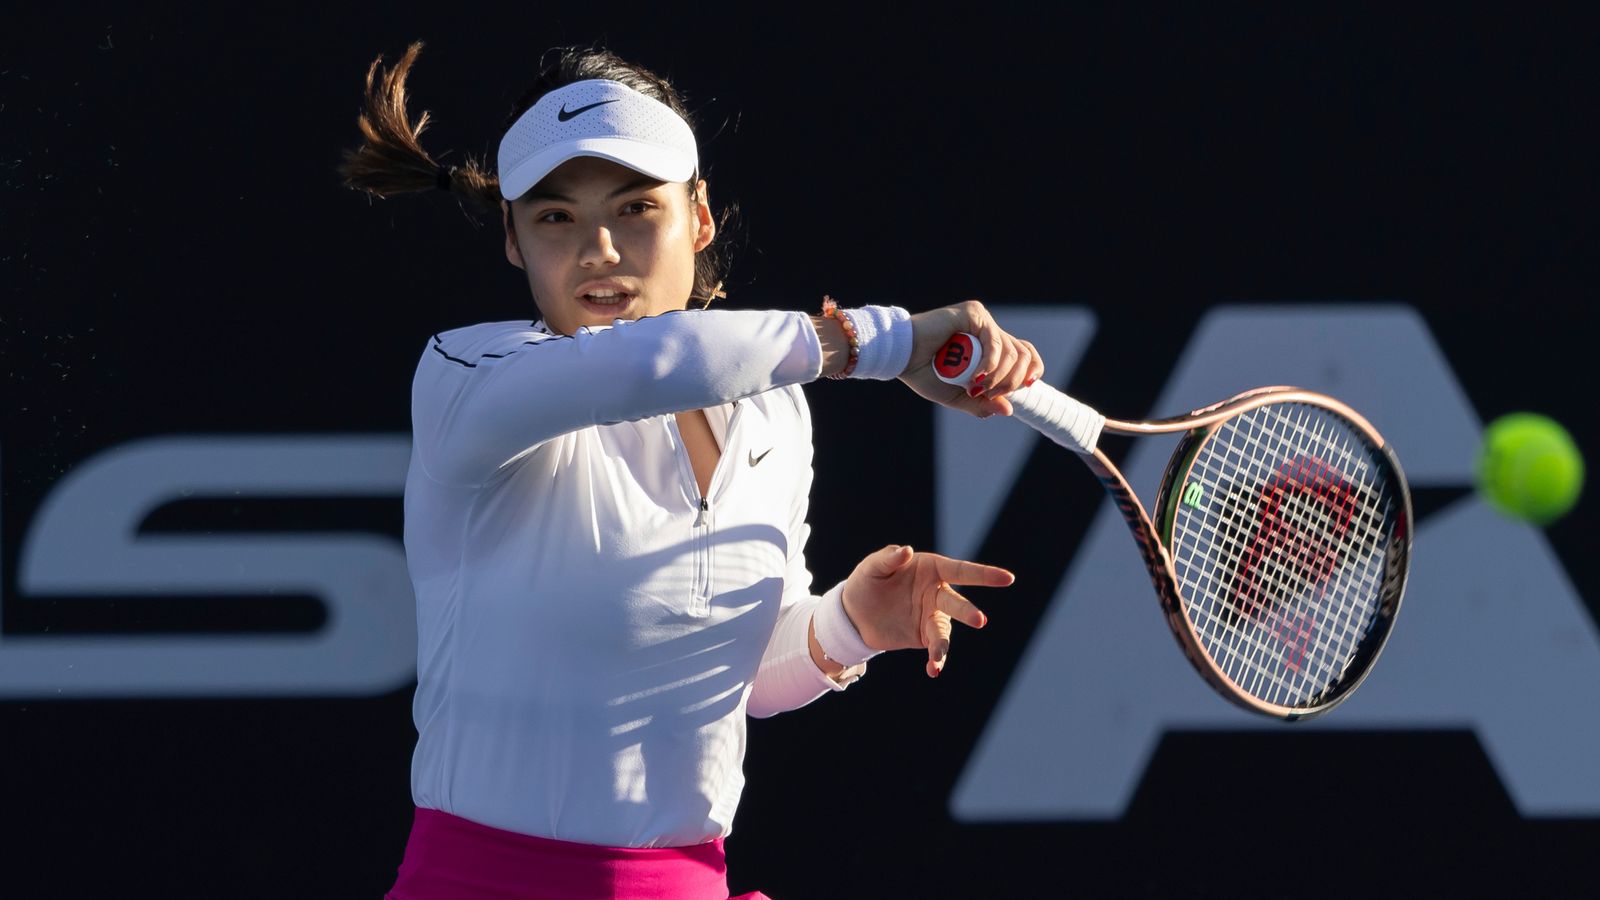 Tennis star Emma Raducanu wins her first match since April after wrist and ankle operations